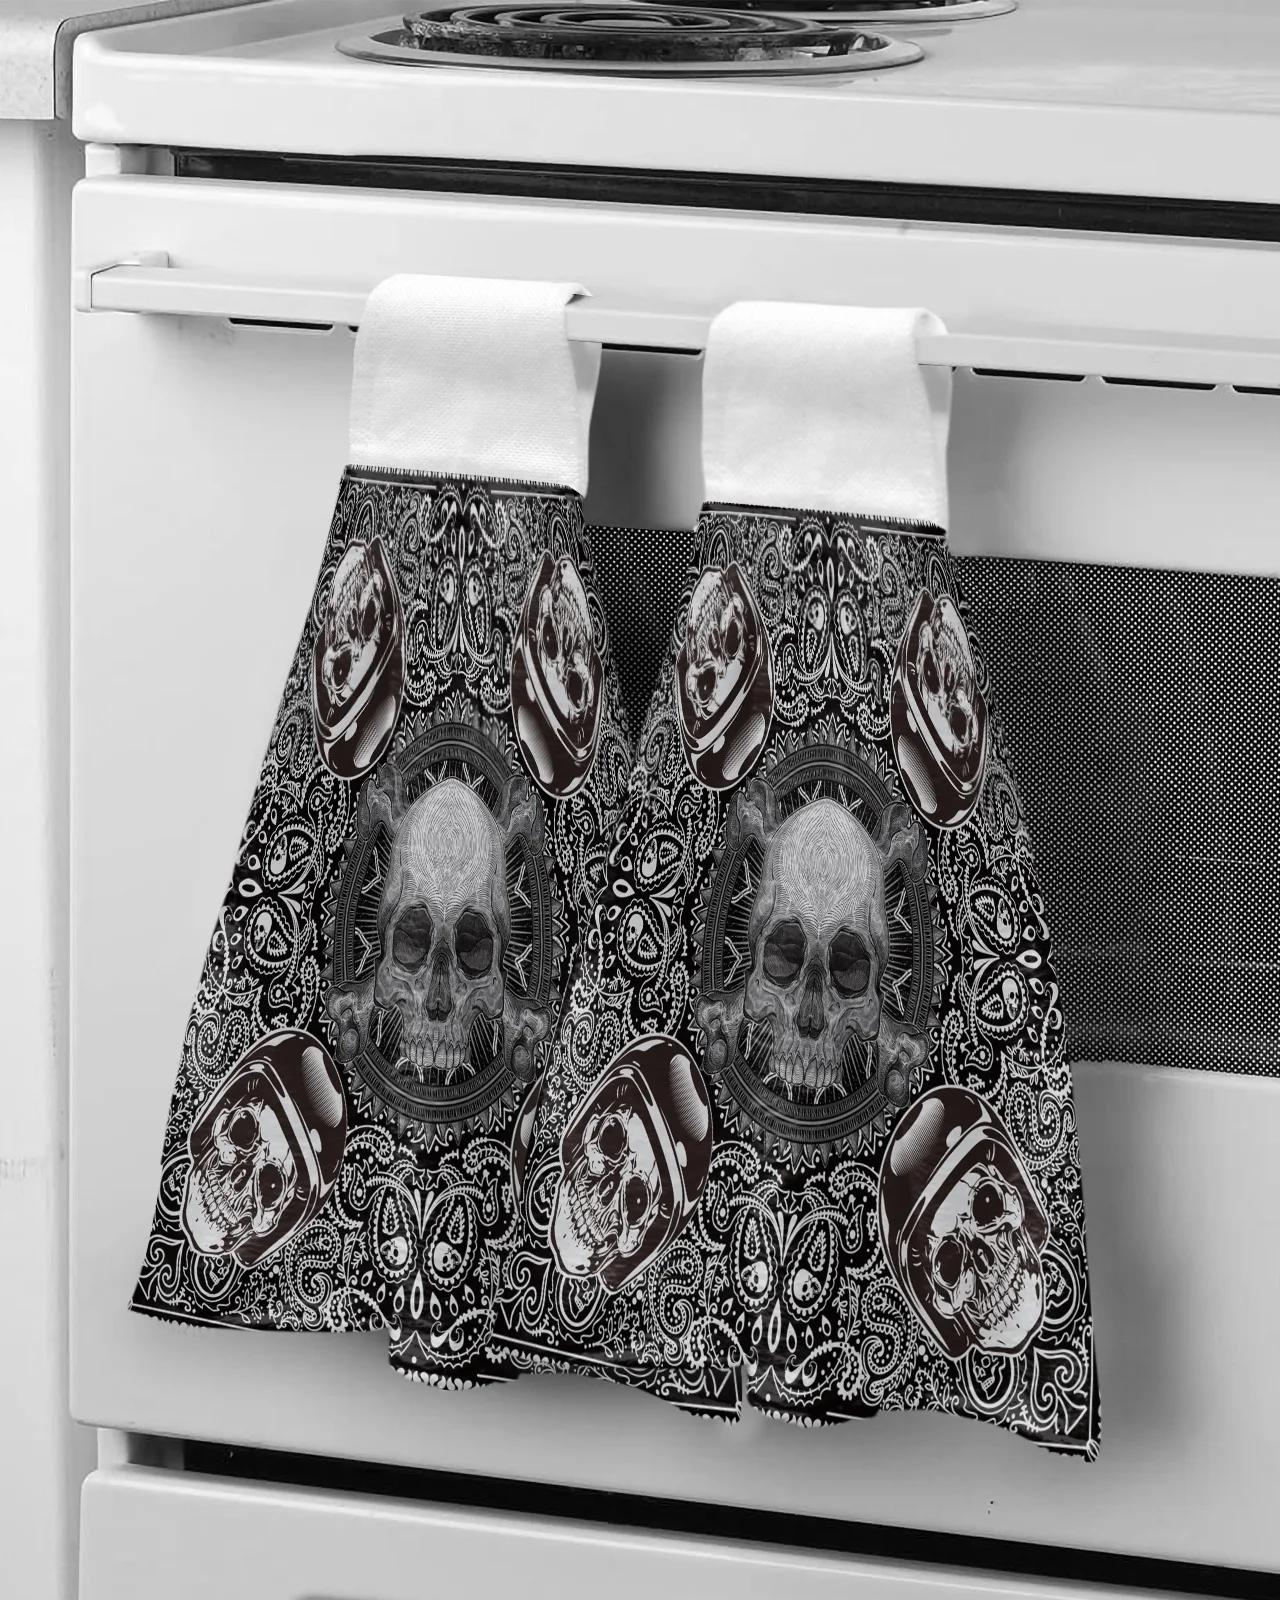 Skull Head Paisley Pattern Kitchen Towel Bathroom Absorbent Soft Childrens Hand Towel Table Cleaning Cloth